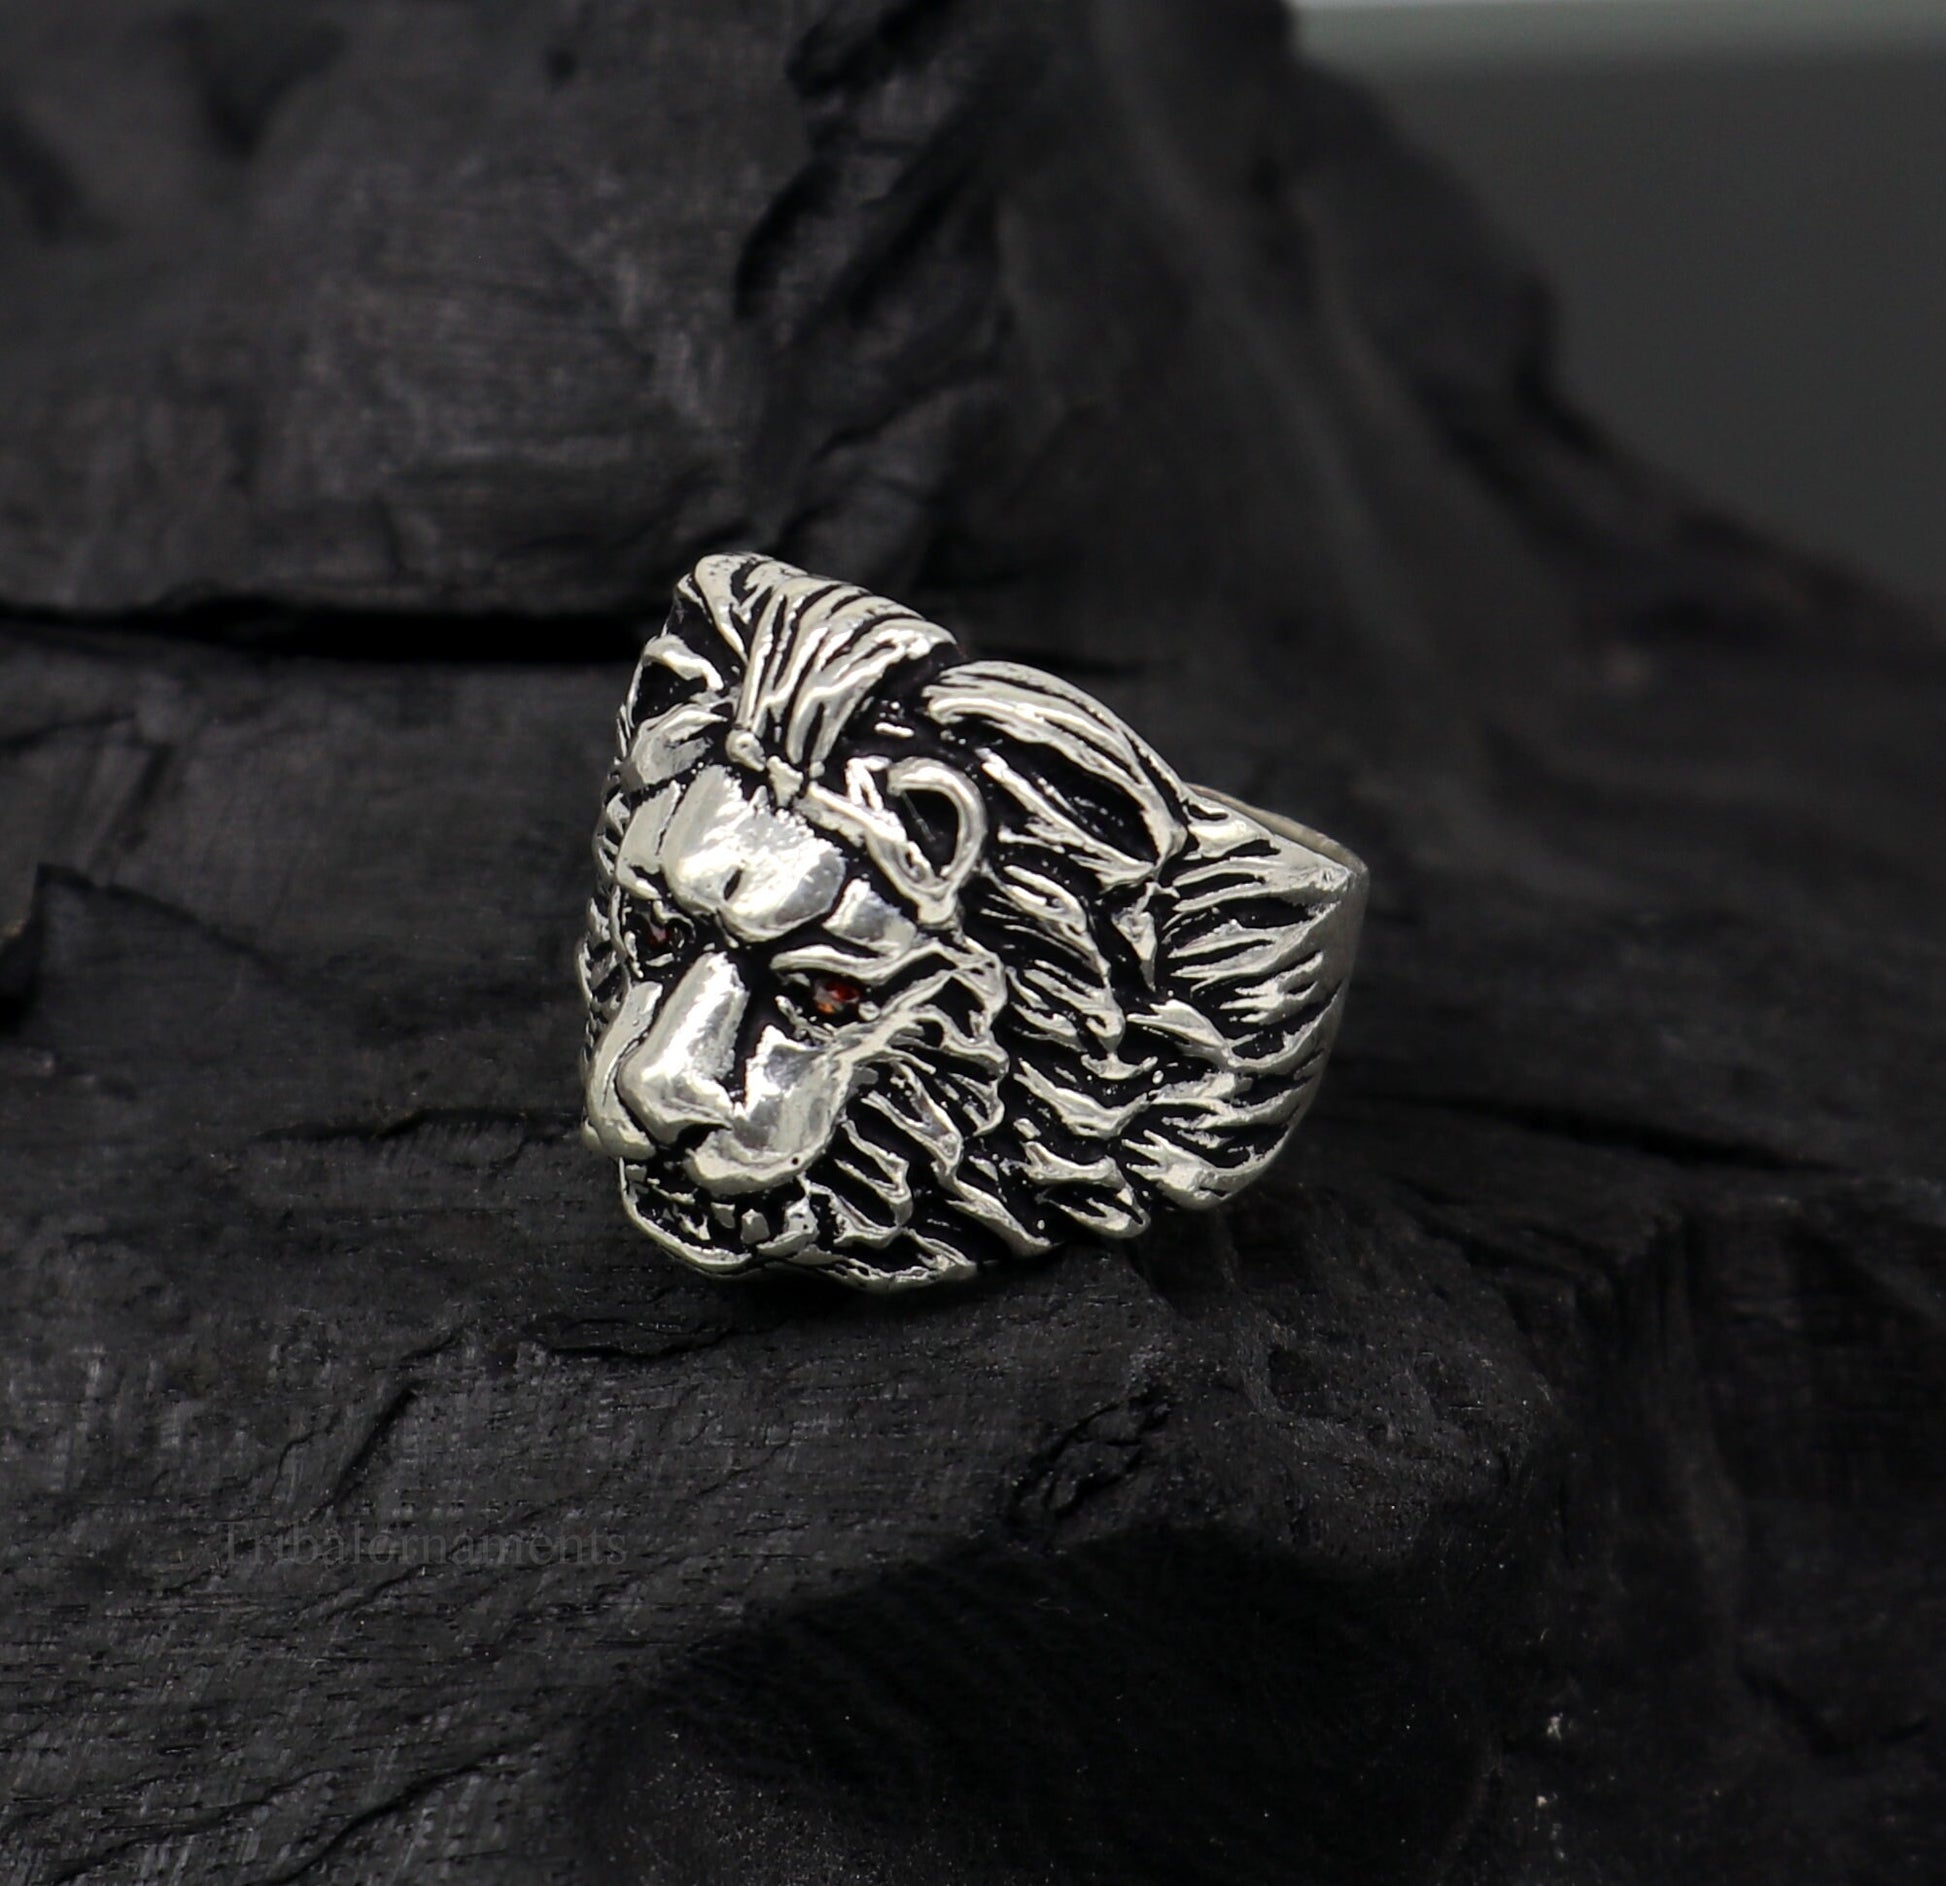 925 sterling silver handcrafted lion ring, Amazing vintage design customized ring band for unisex gifting from india ring432 - TRIBAL ORNAMENTS